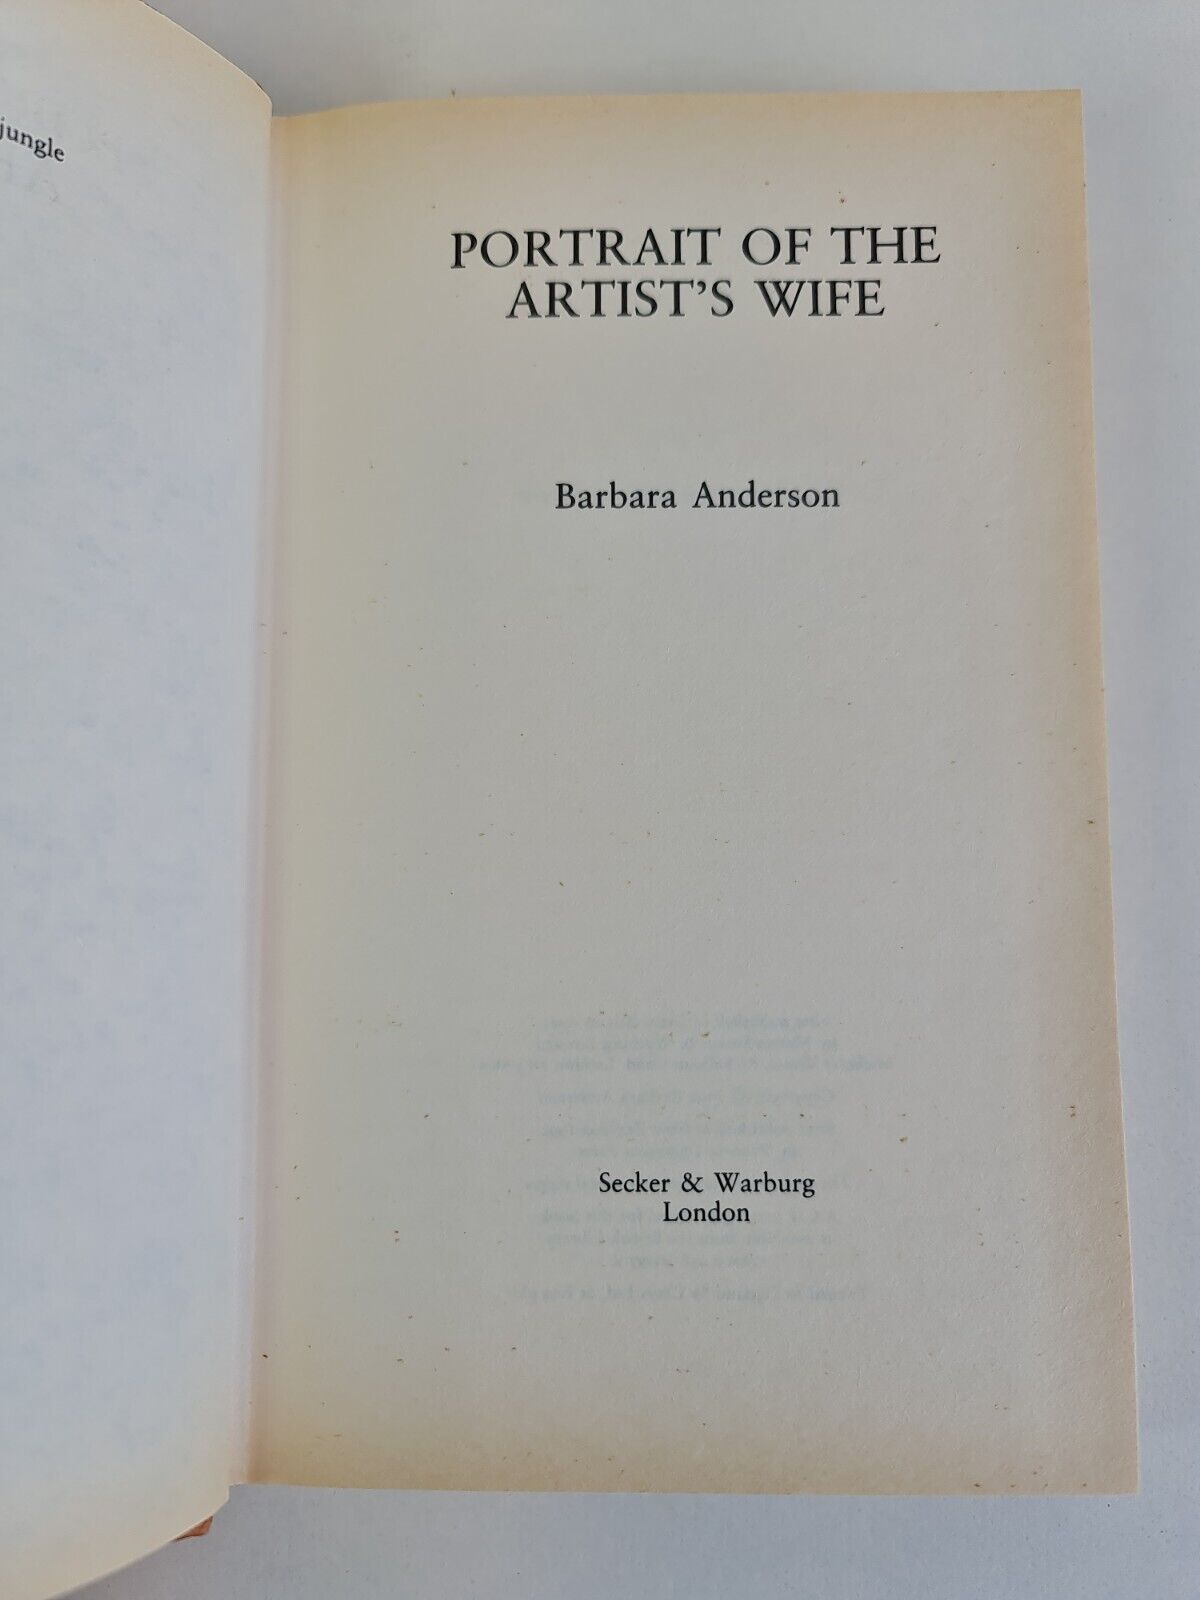 Portrait of the Artist's Wife by Barbara Anderson